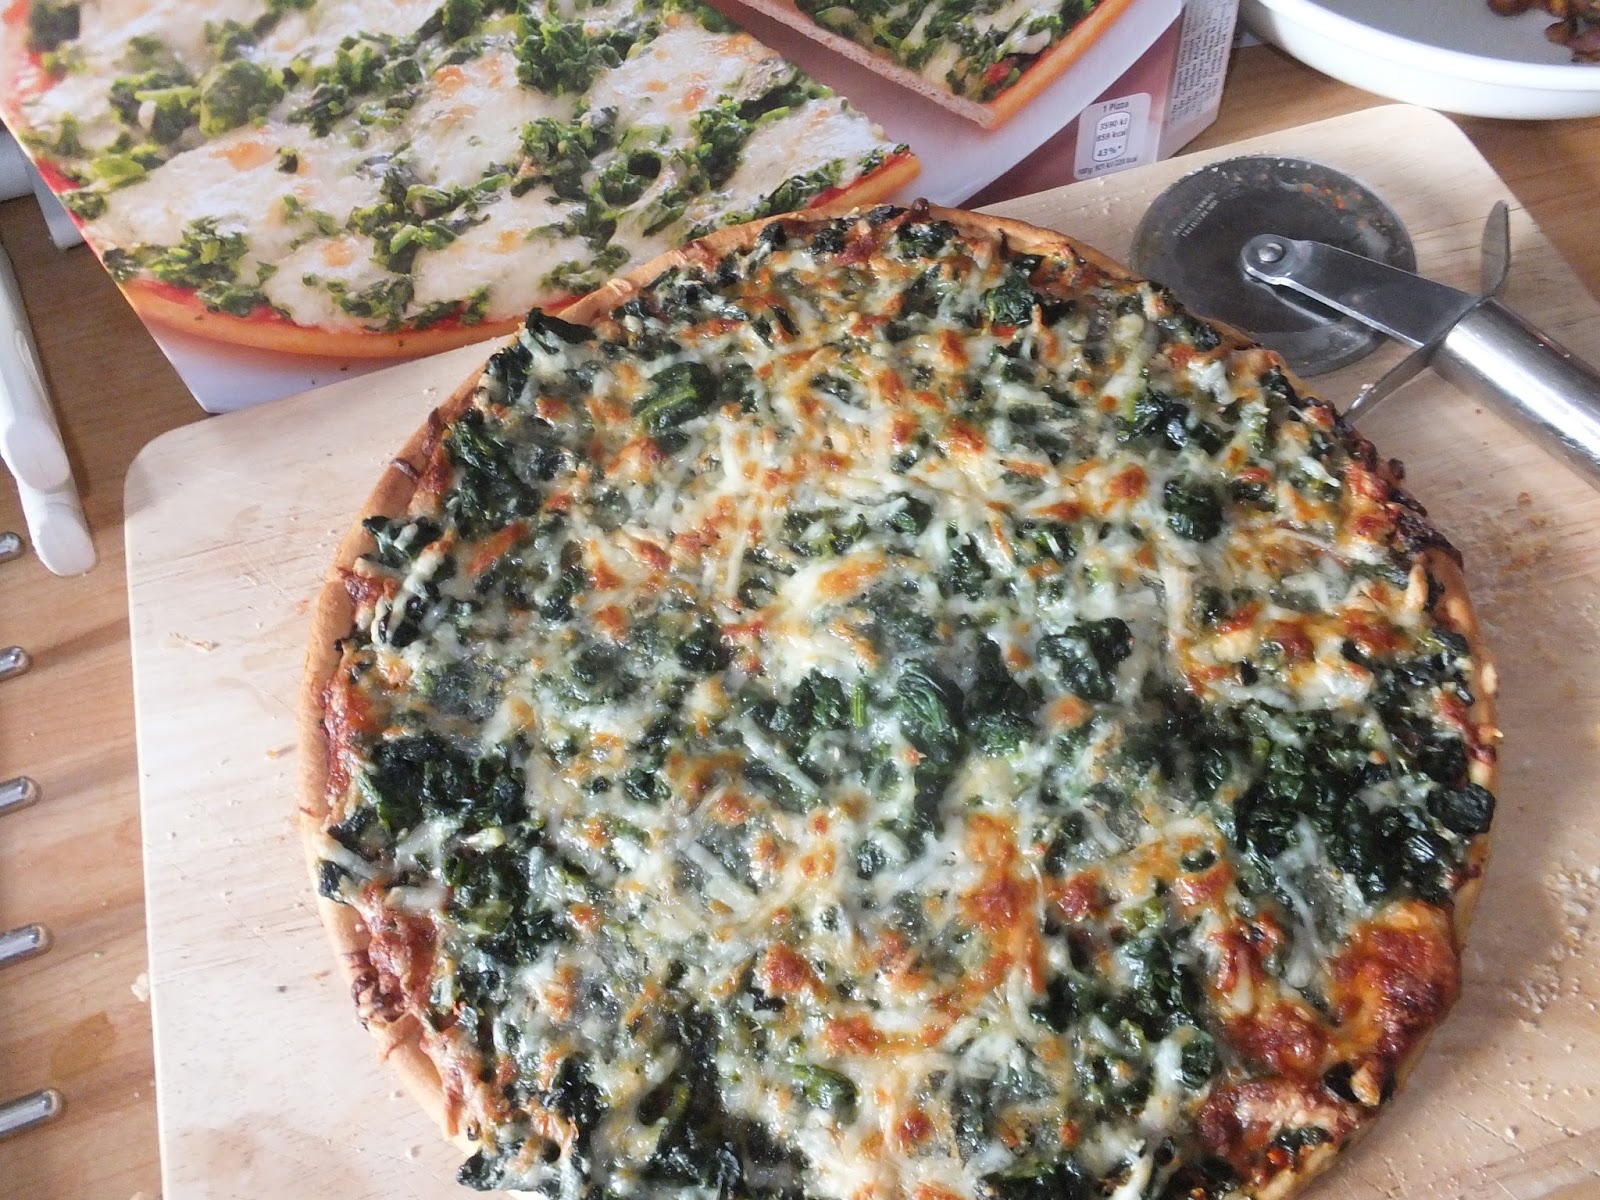 Review: Pizza Spinaci by Dr Oetker Ristorante #SpinaciIsBack